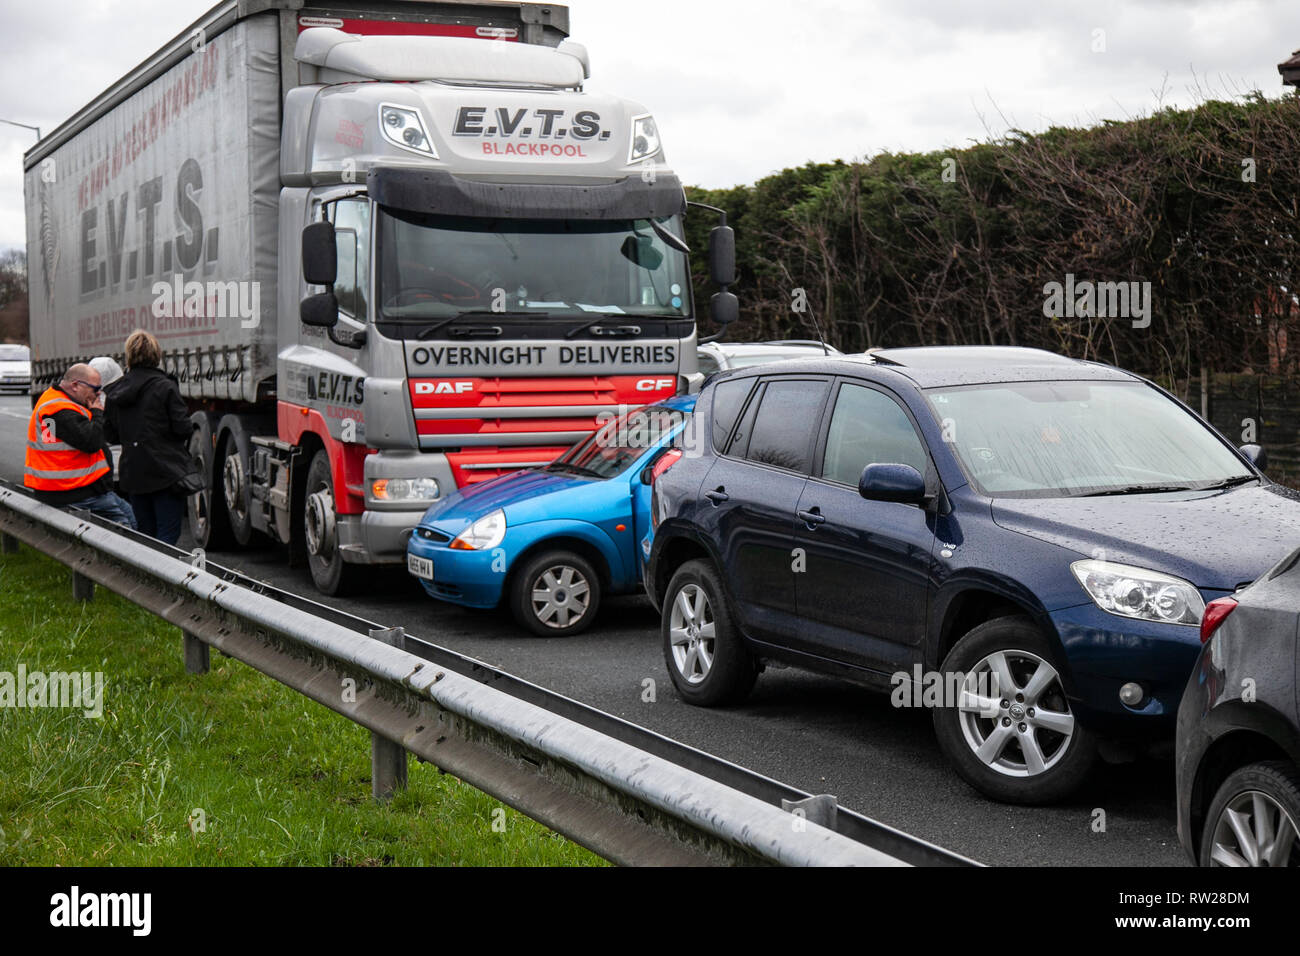 HGV traffic accident with car on dual carriageway; TRC on the A565 Gravel lane roundabout between DAF heavy goods vehicle and small Ford compact family car which ended up being pushed sideways down the road. Stock Photo